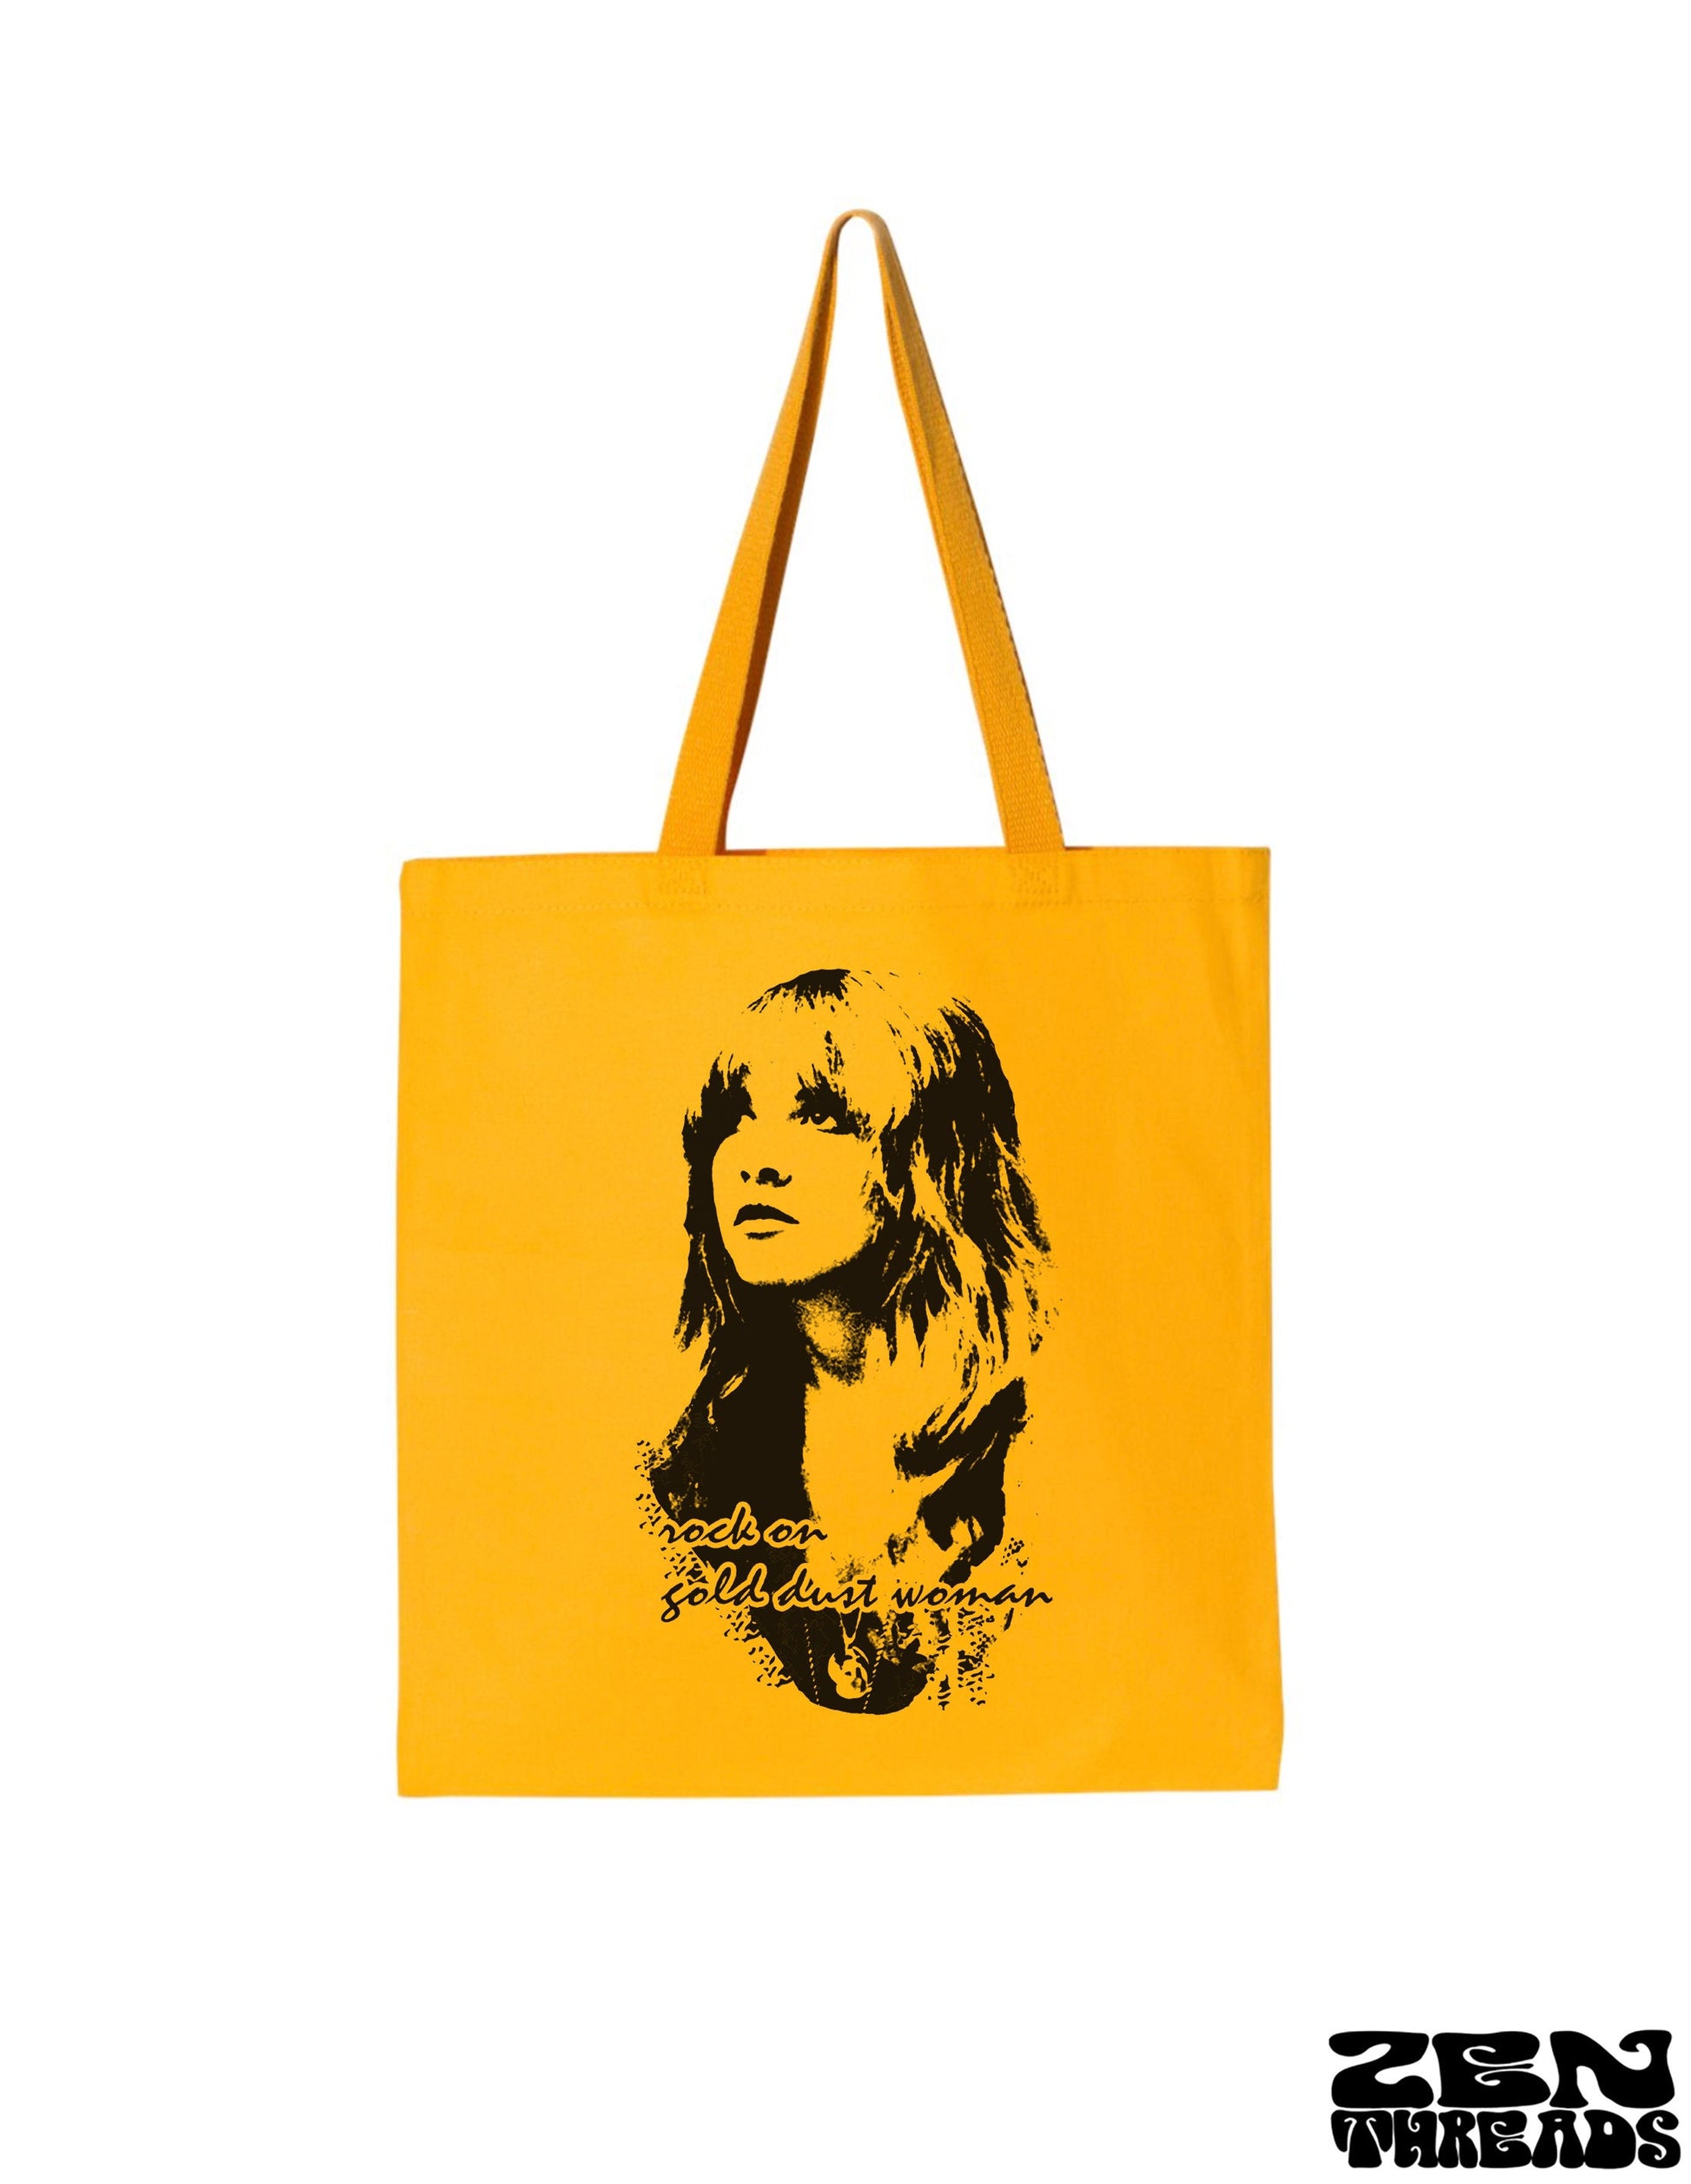 Gold Dust Woman Eco-Friendly Market Tote Bag eco printed book bag grocery handle bag (Ships FREE!)